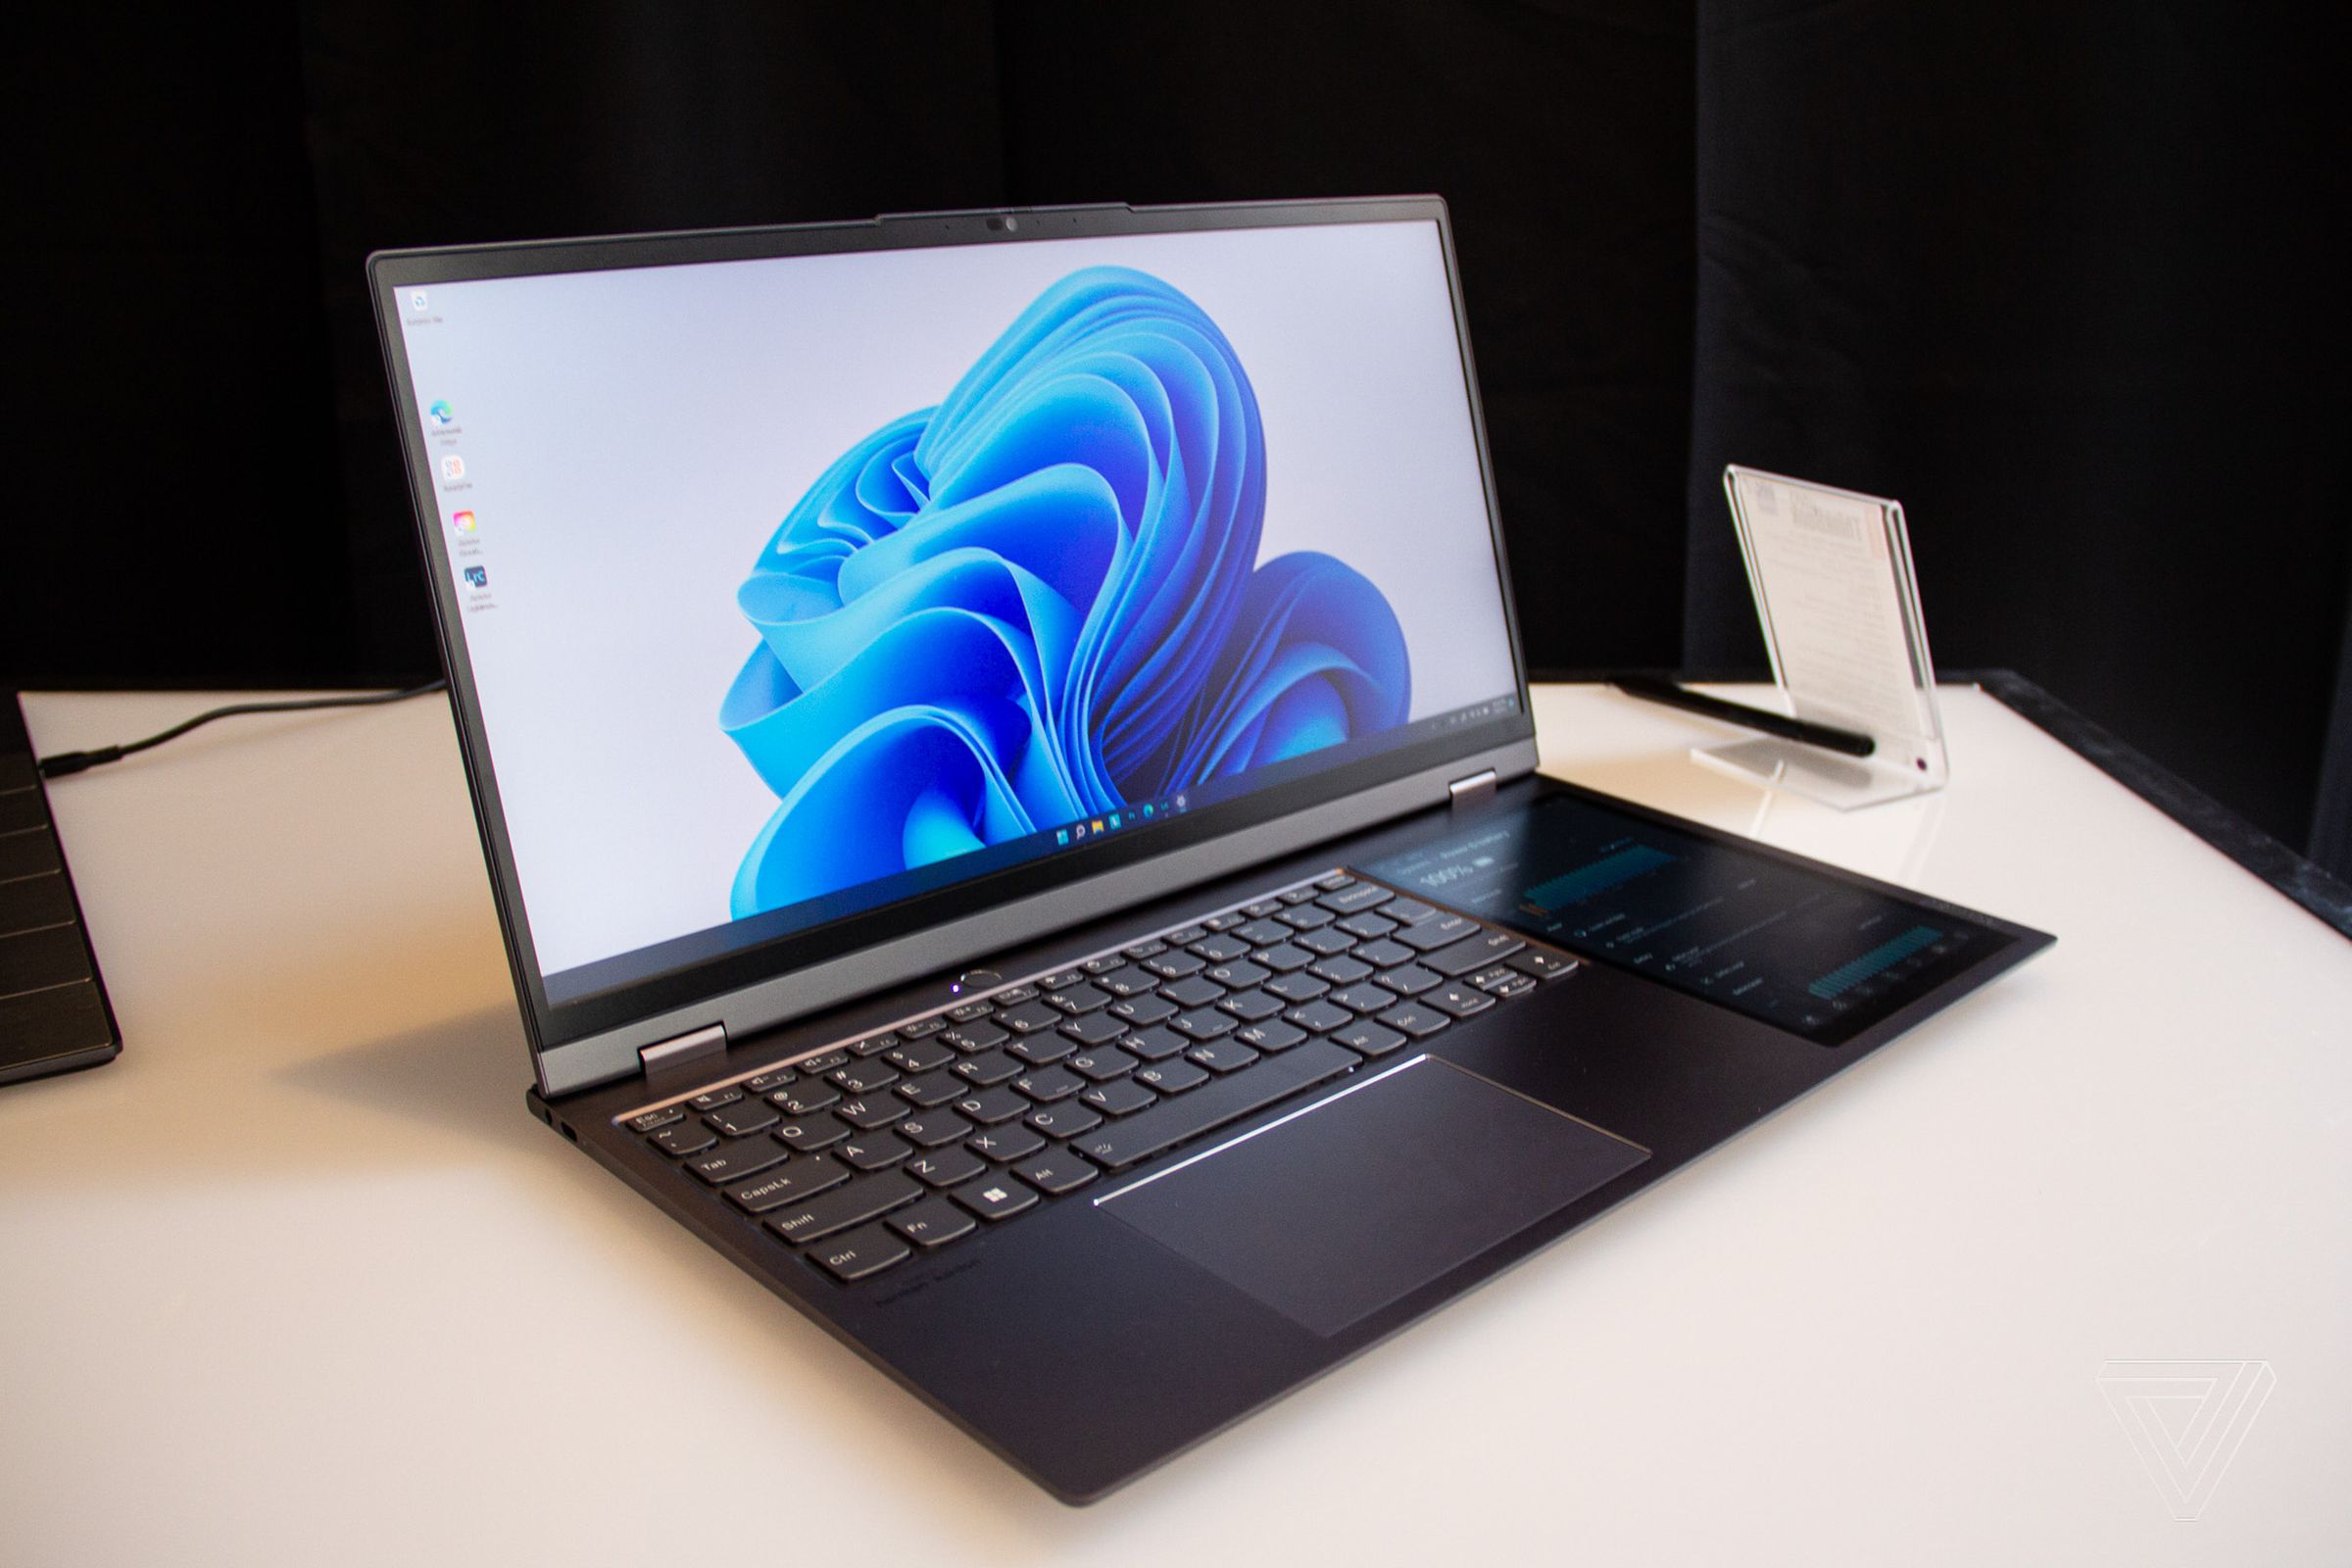 The ThinkBook Plus Gen 3 open on a table angled to the right. The primary screen displays a blue swirl on a white background.